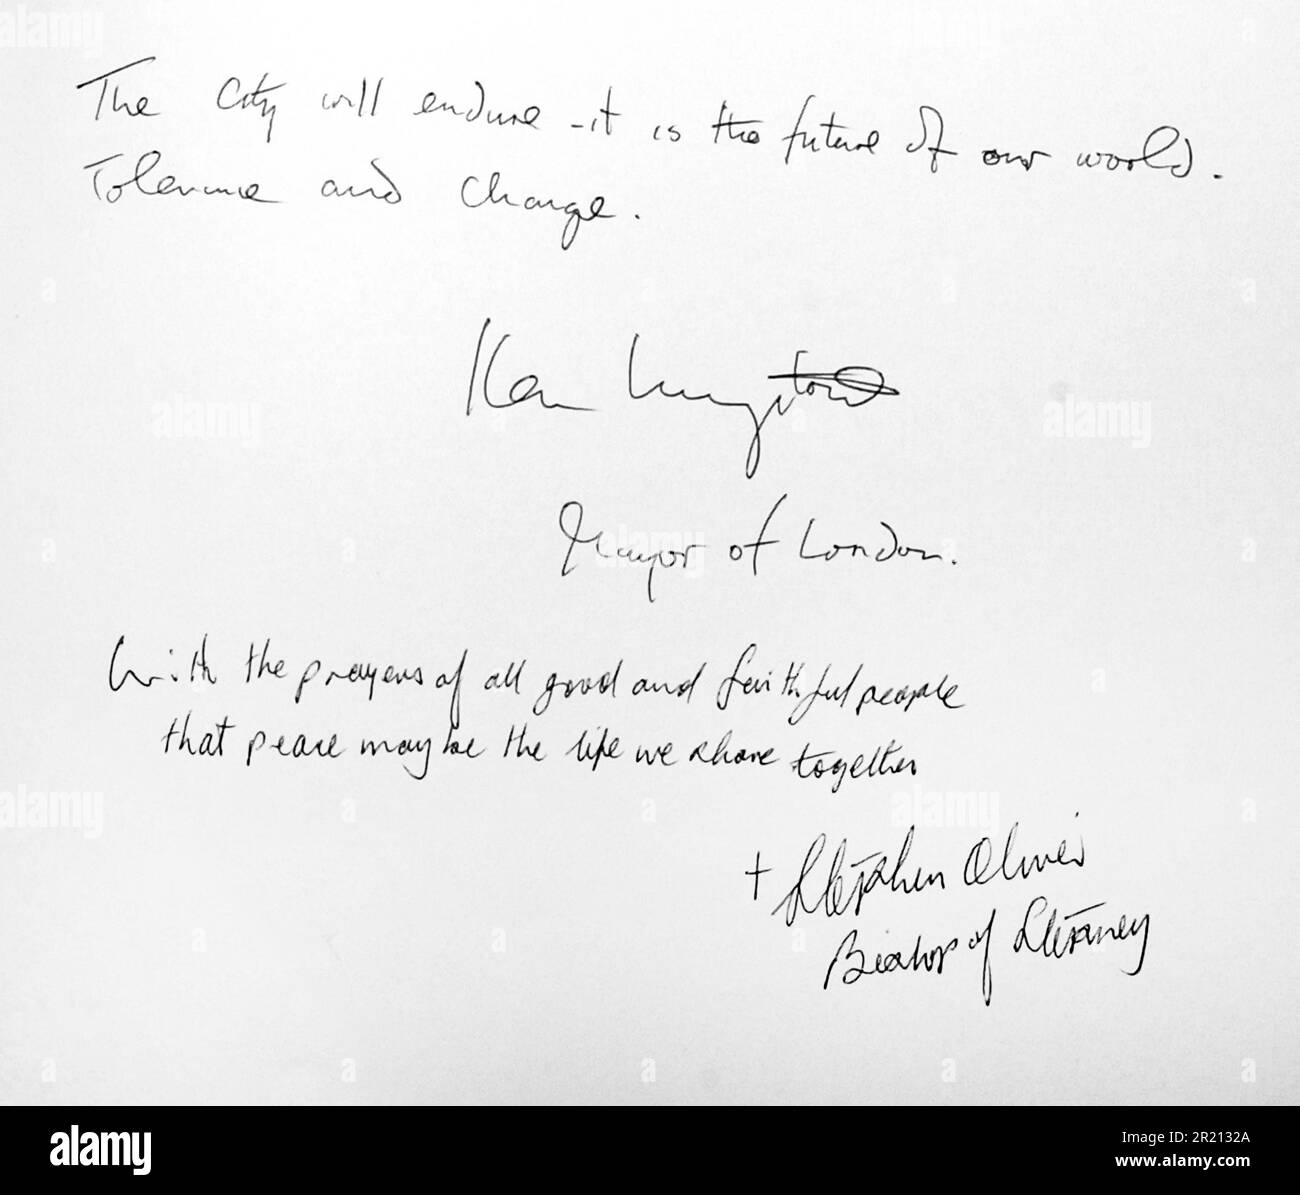 Photograph of Ken Livingstone's condolence message, in a Book of Condolence in Victoria Embankment's Memorial Garden where wreaths, flowers and tributes were laid in memory of the victims of London's terror attacks. The 7th July 2005 London bombings, often referred to as 7/7, were a series of coordinated Islamist terrorist suicide attacks in London, England, that targeted commuters travelling on the city's public transport system during the morning rush hour. Stock Photo